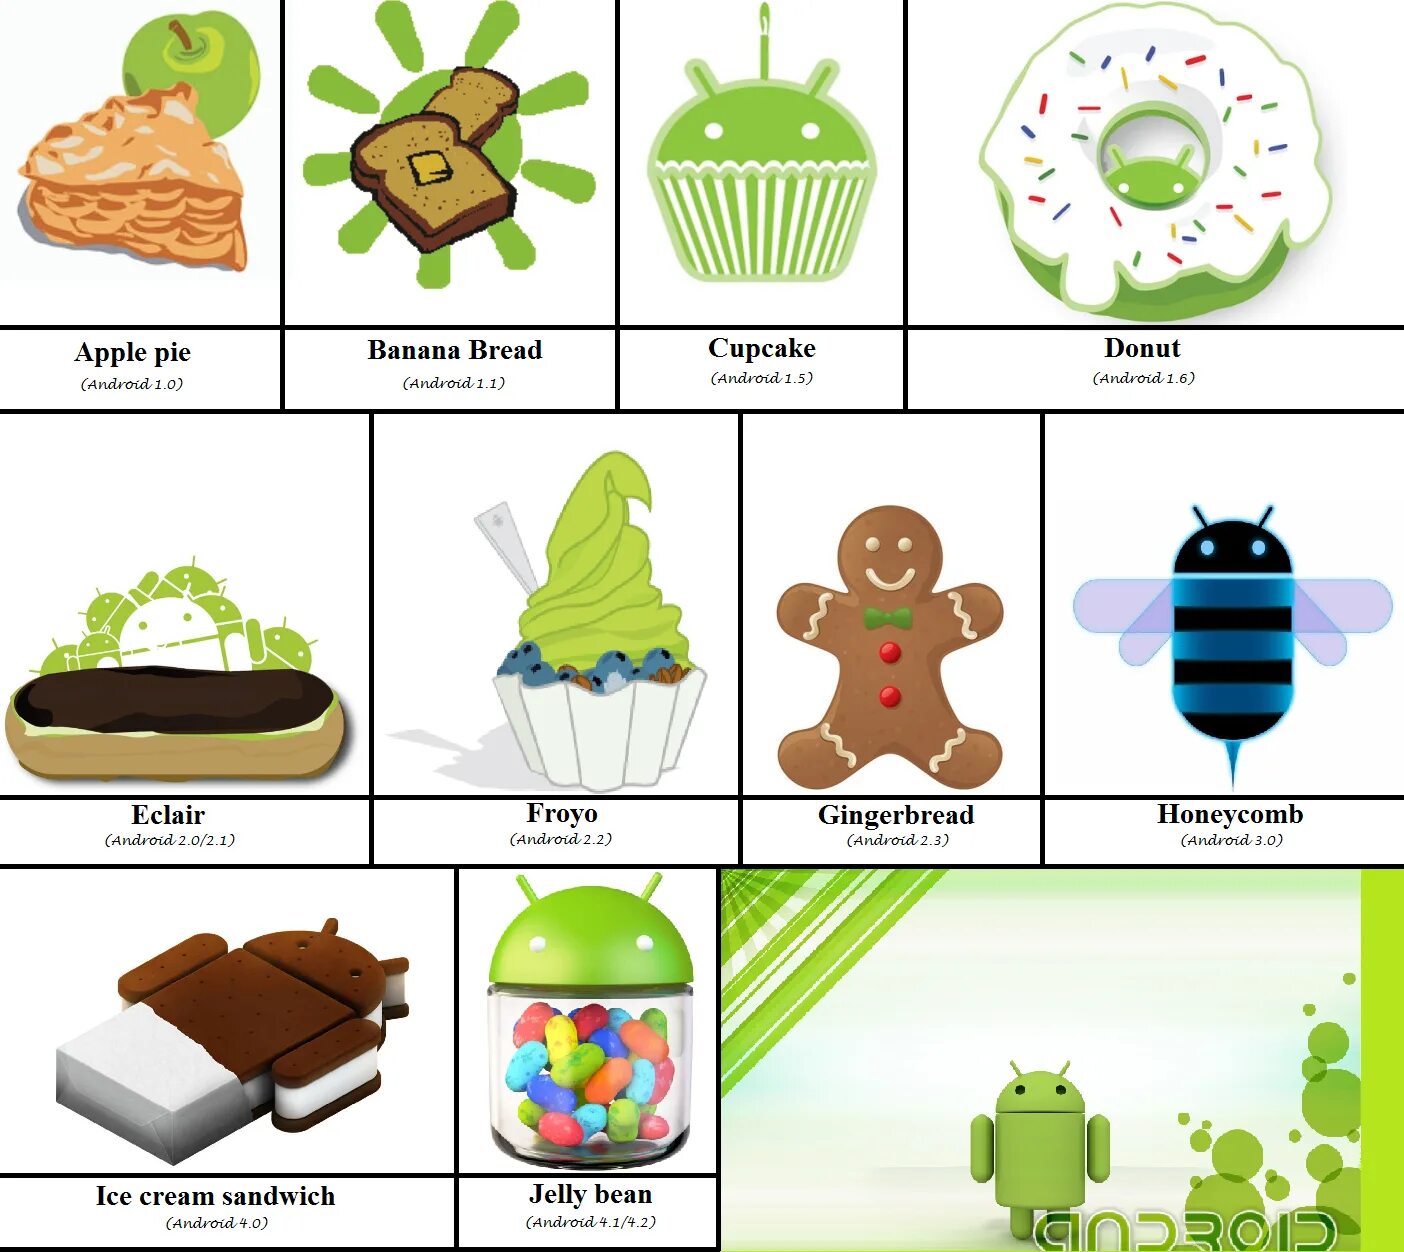 Android года выпуска. Андроид 1.0. Android 1.0 Apple pie. Android 1.1. Android Cupcake телефоны.